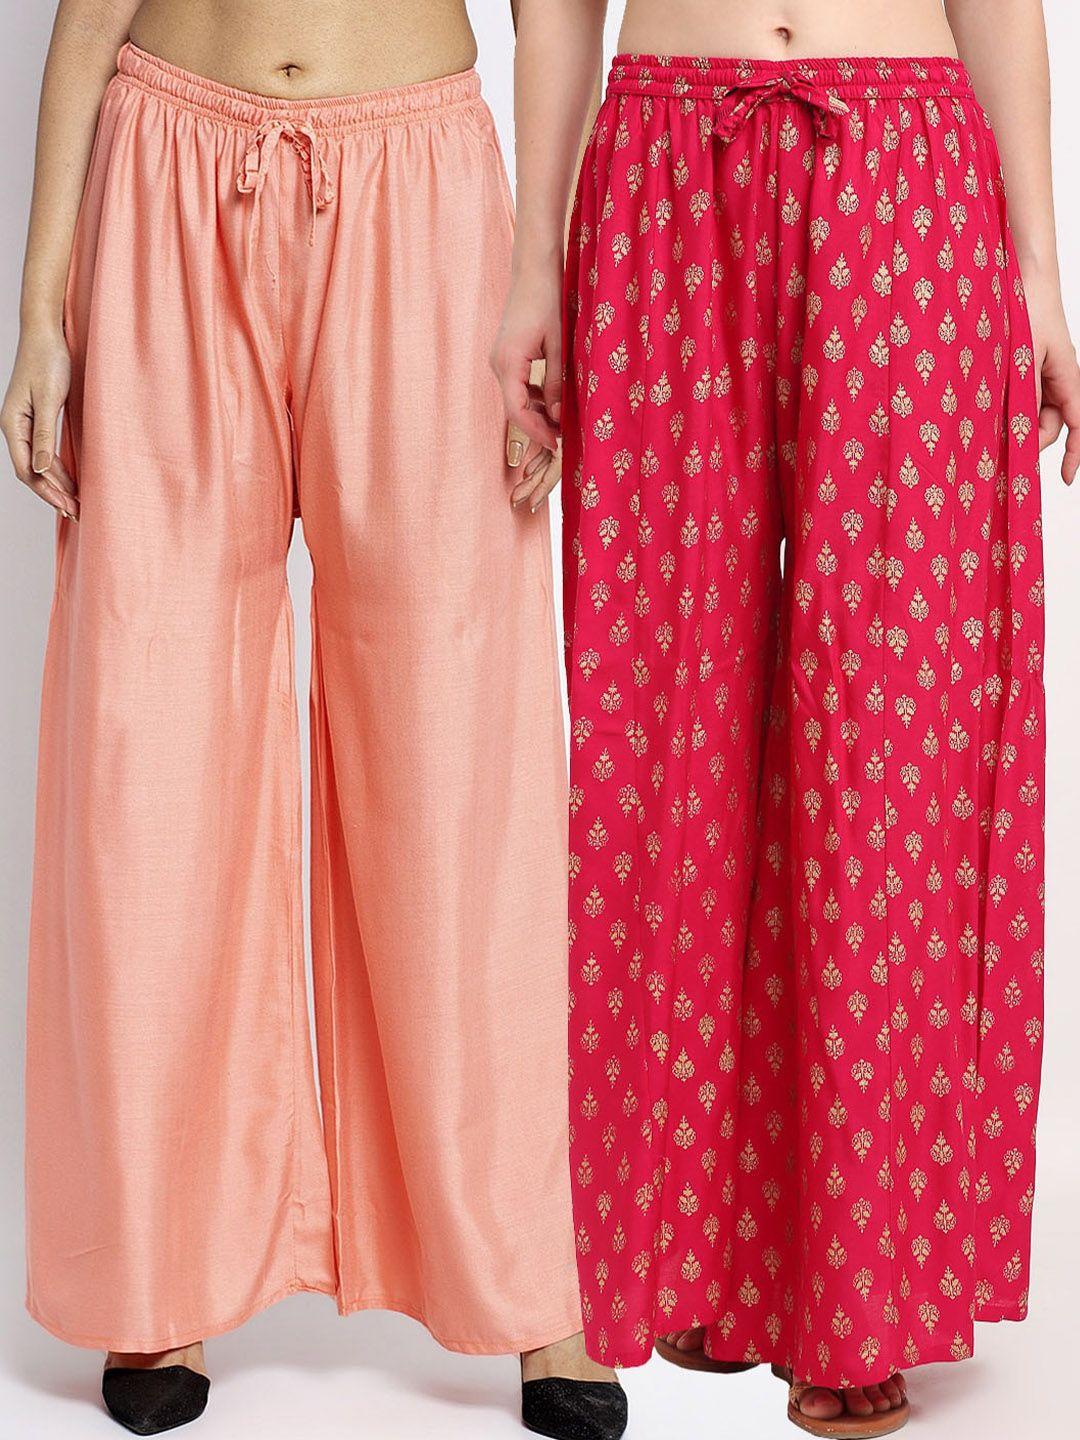 gracit woman pack of 2 peach-coloured & red flared knitted ethnic palazzos